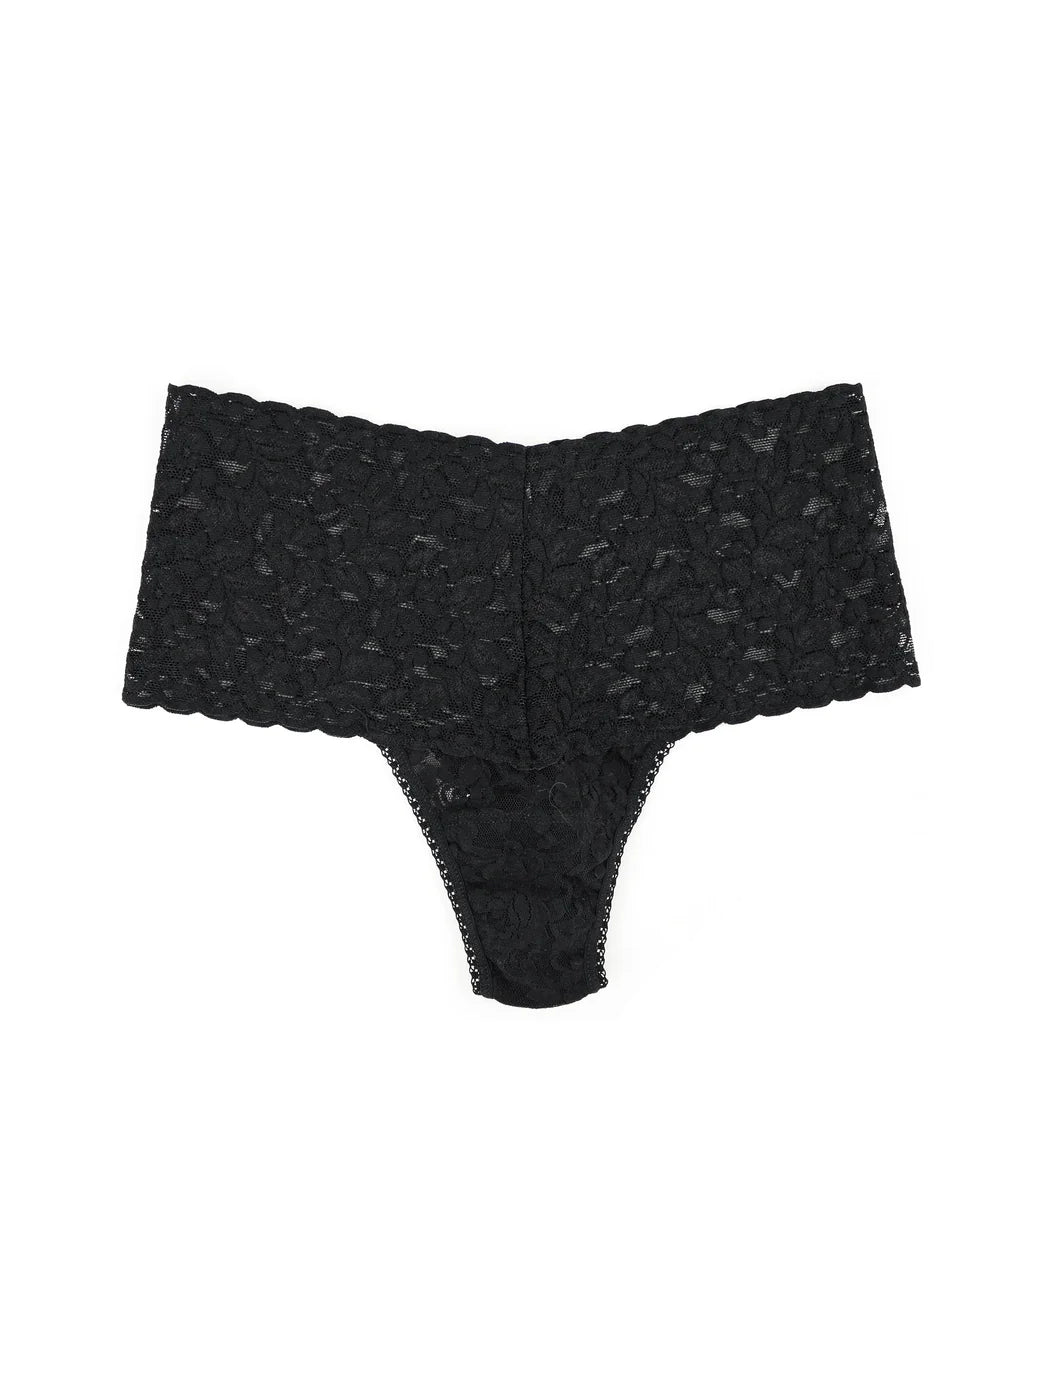 Wrapped Retro Signature Lace Thong In Black - Hanky Panky - picture of the panty without background